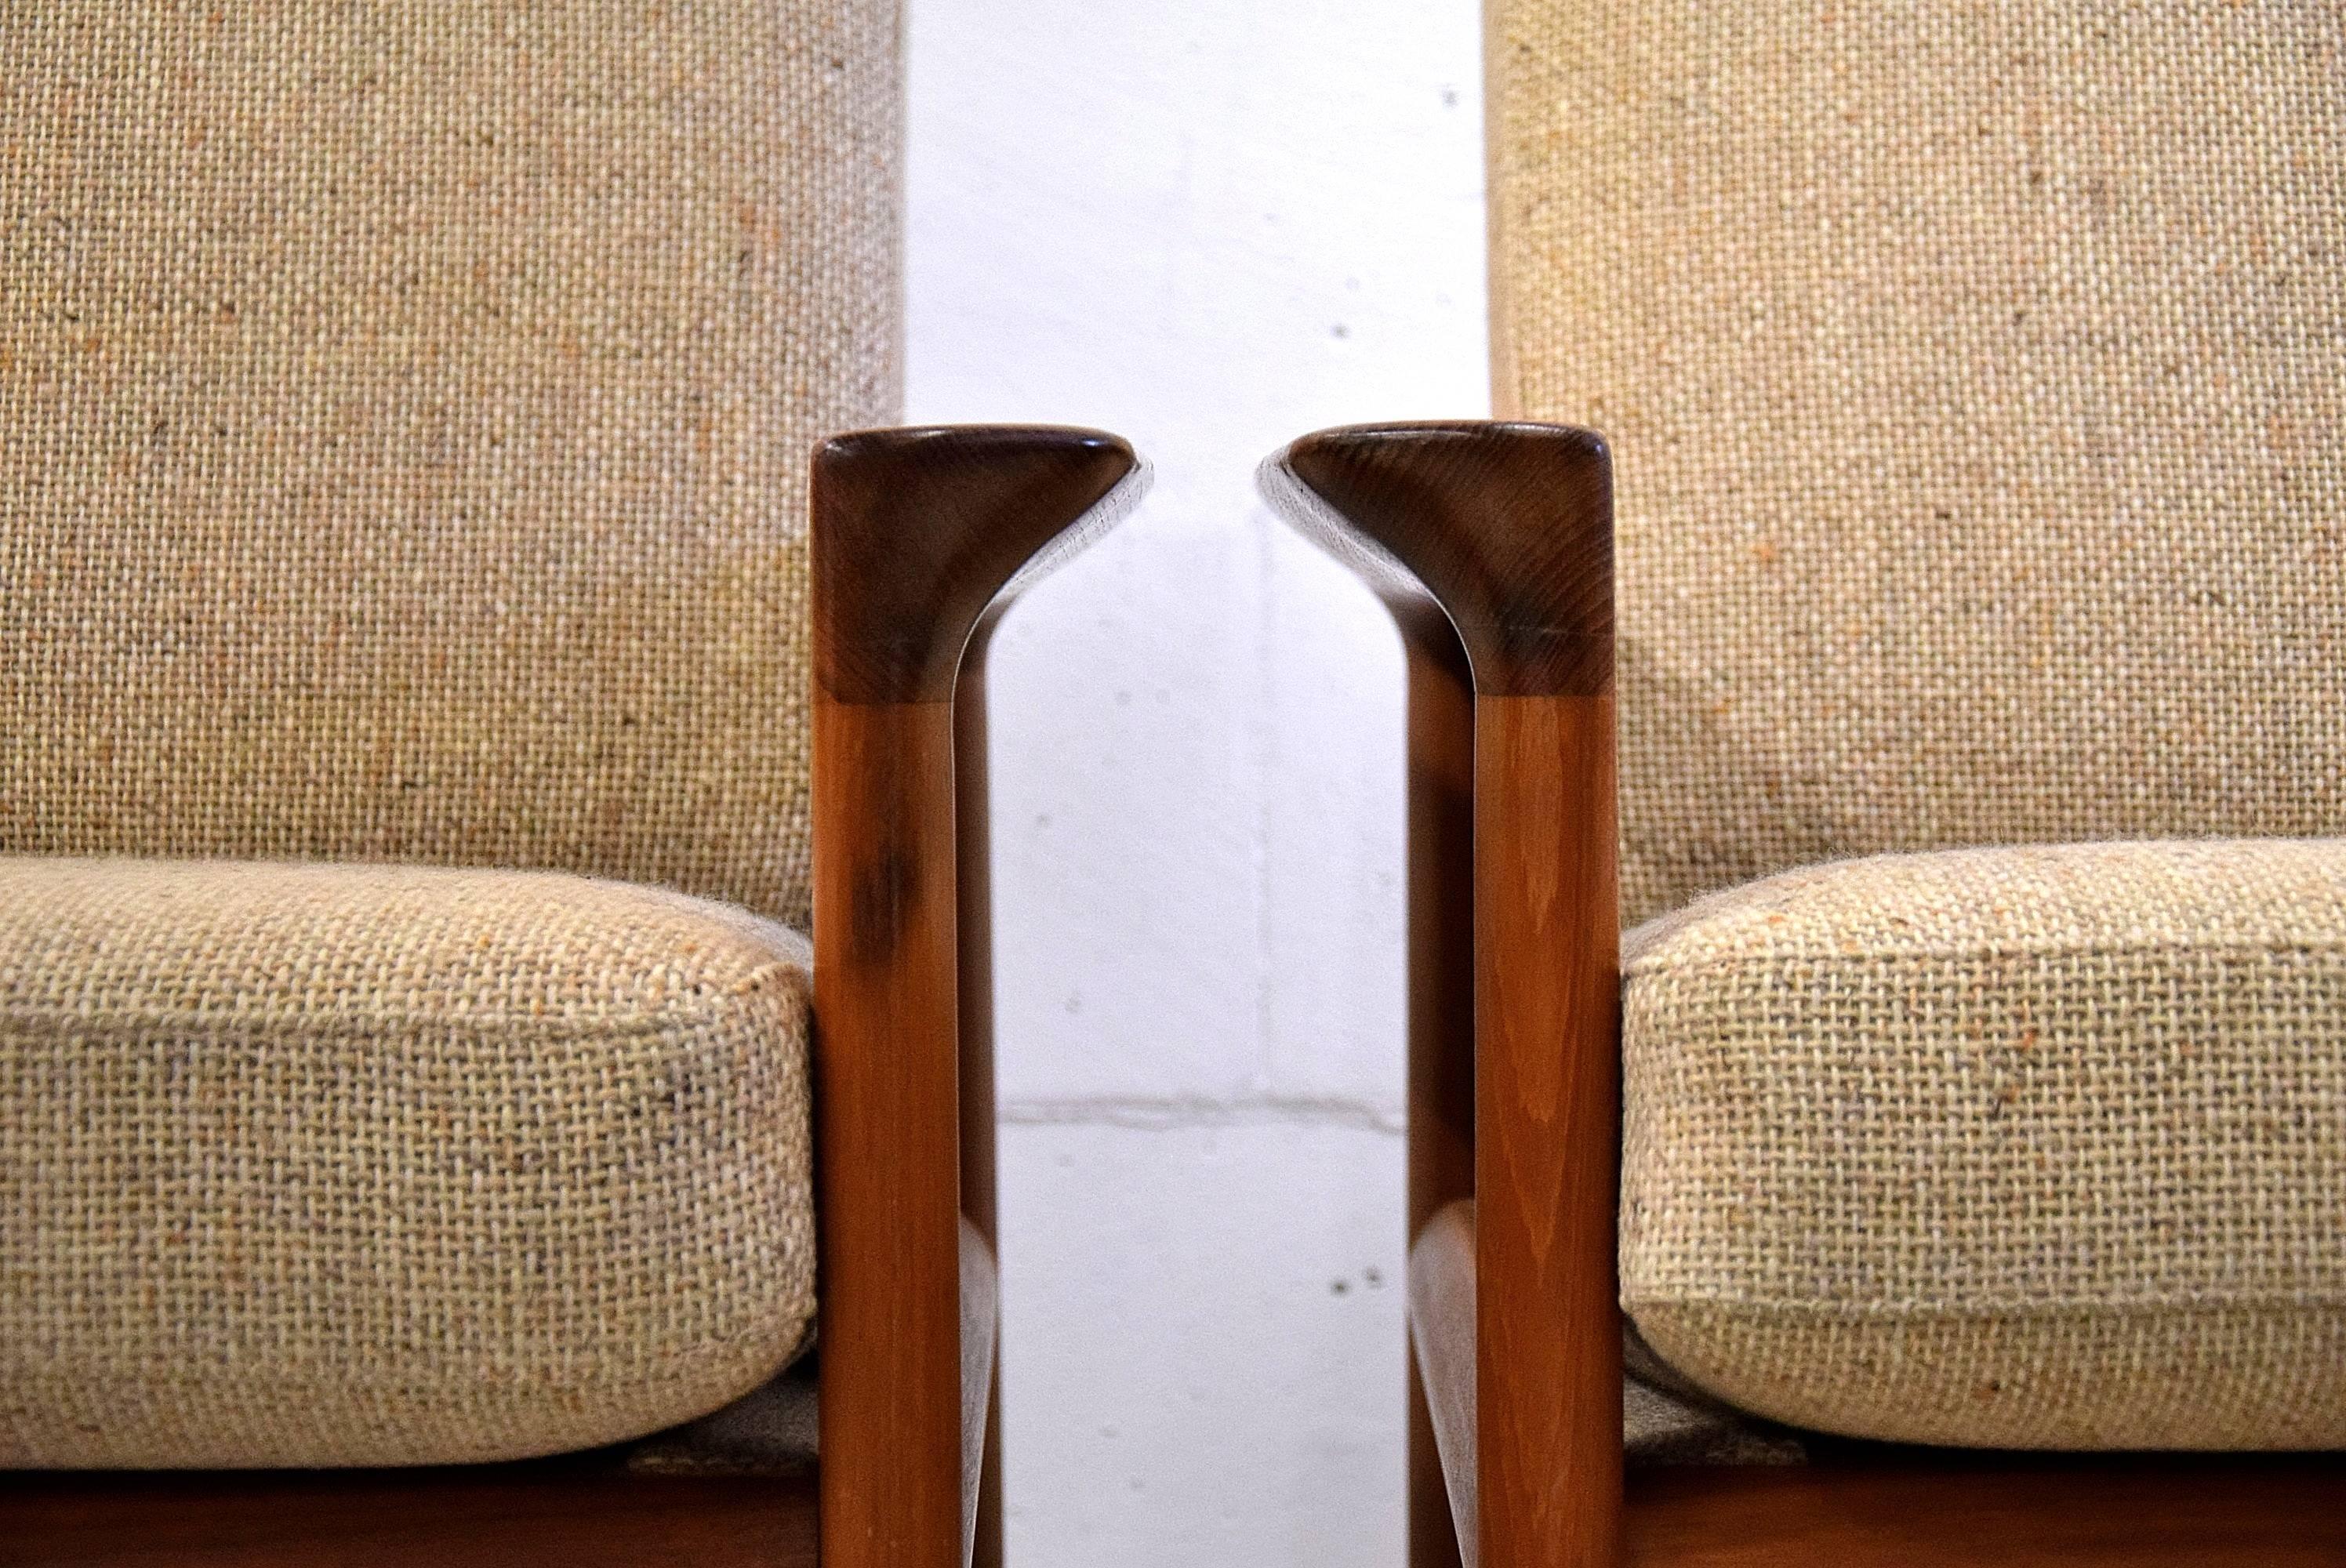 Teak mid century modern Sven Ellekaer lounge chairs
Classy Danish early 1960s Borneo armchairs designed by Sven Ellekaer for Komfort. The chairs are made of solid teak and have their original upholstery which is a mix of wool, cotton and rayon. The